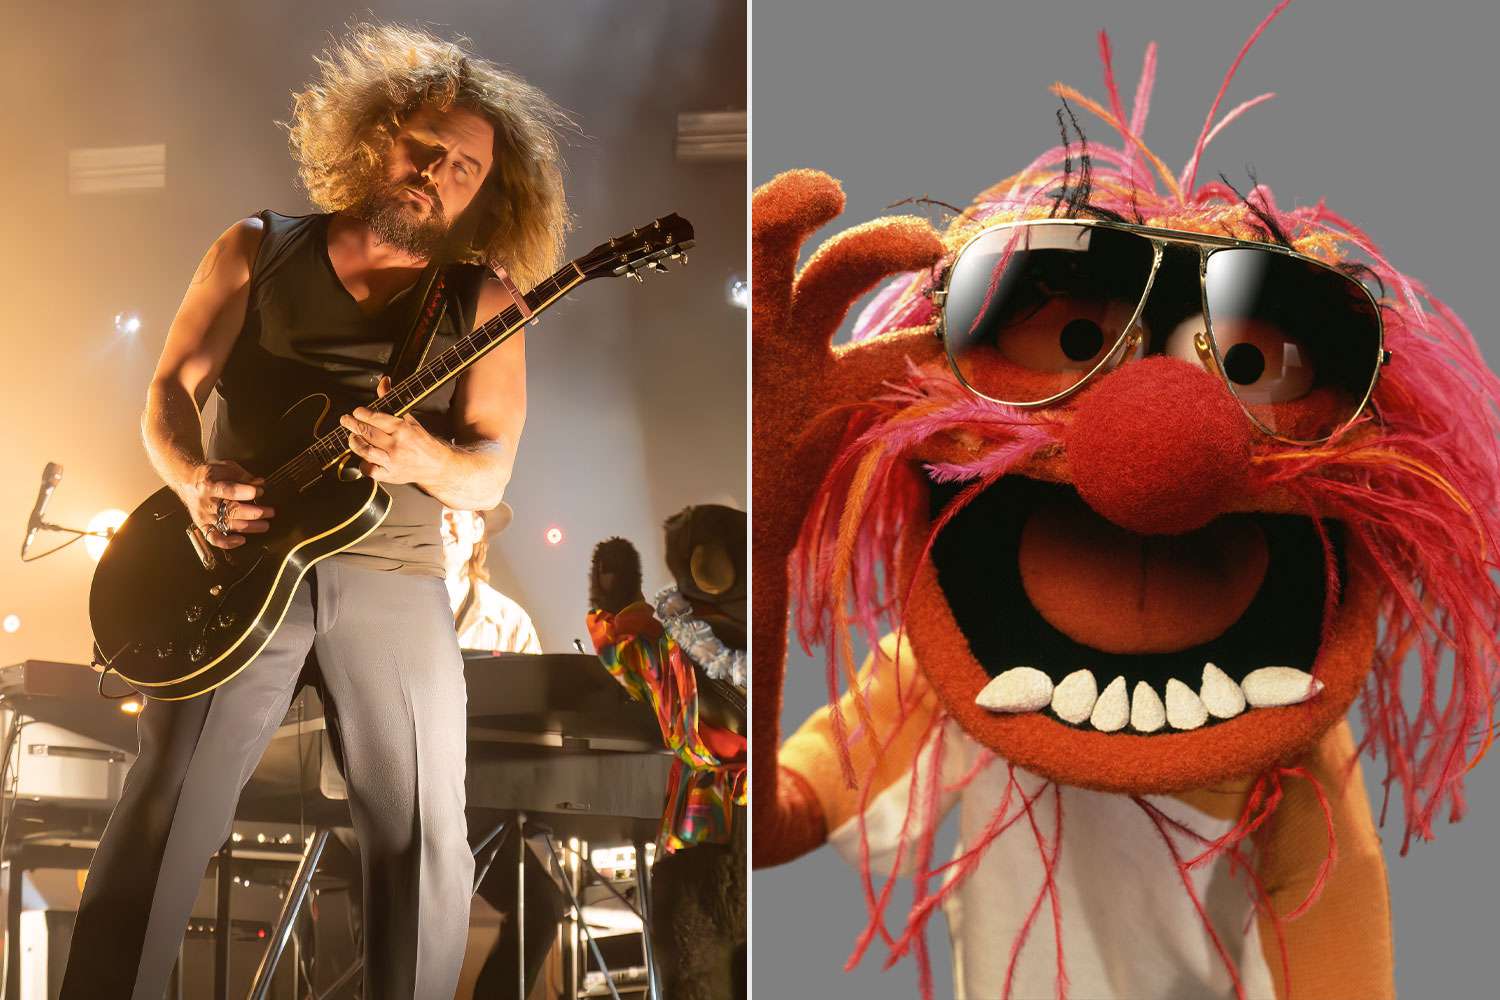 Animal from the Muppets plays drums in My Morning Jacket performance